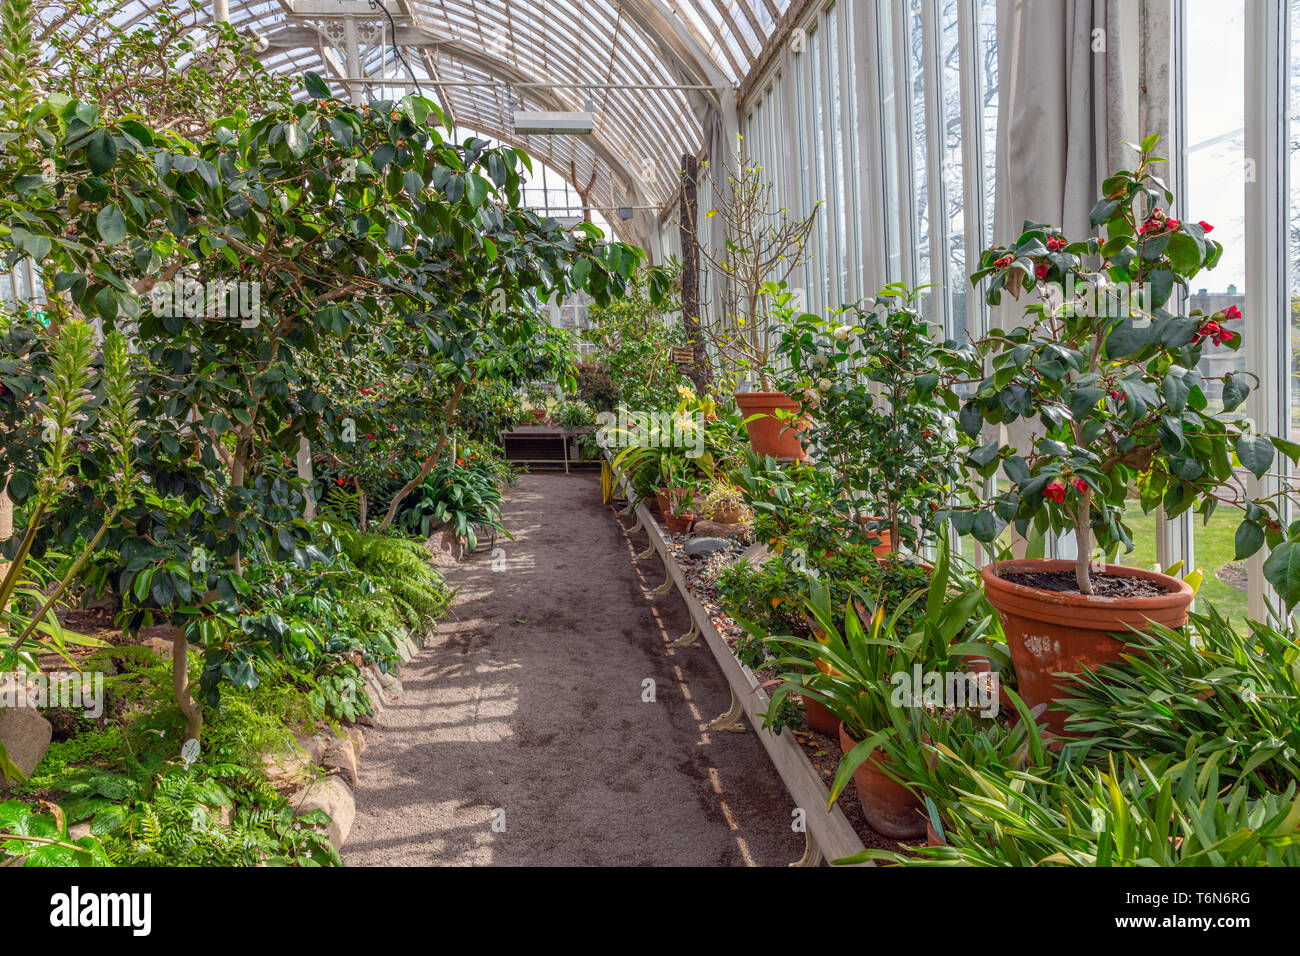 Tropical greenhouse with plants and cactuses Stock Photo